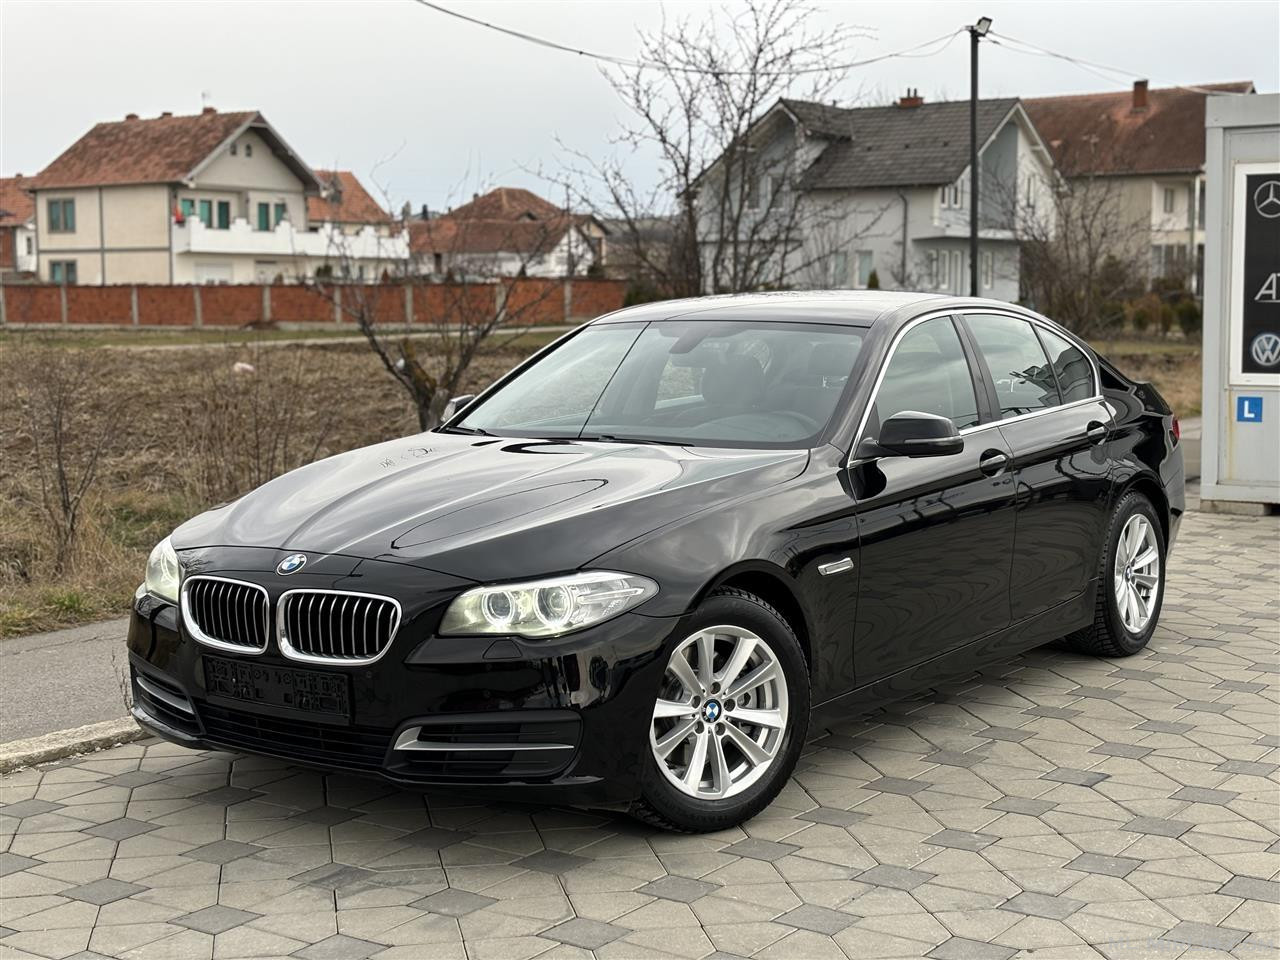 Bmw F10 2.0d Luxory Line Facelift Model 2014 Full Opsion